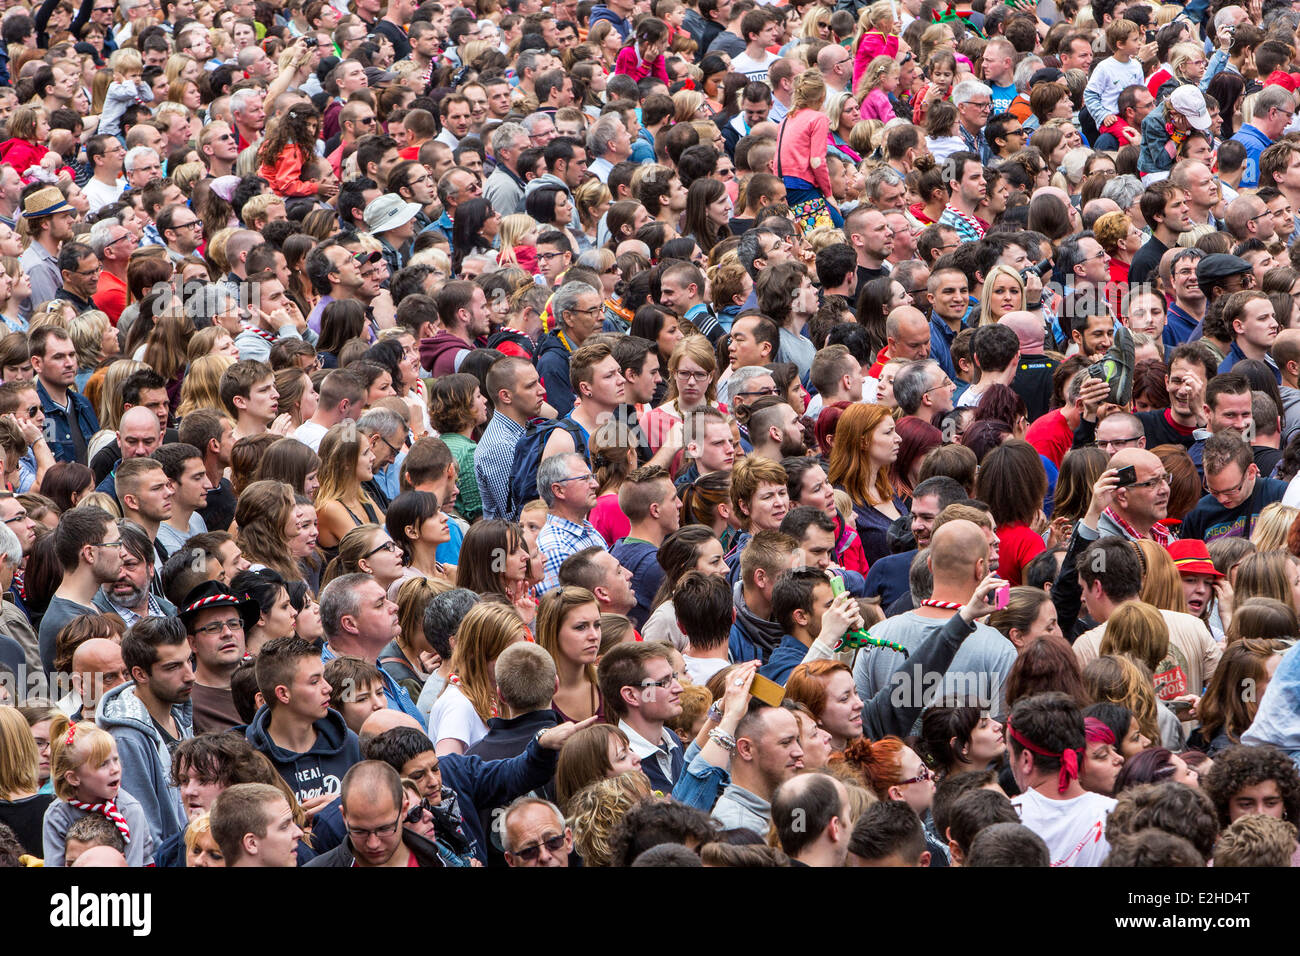 Crowd, many people in confined space, at a festival, Stock Photo